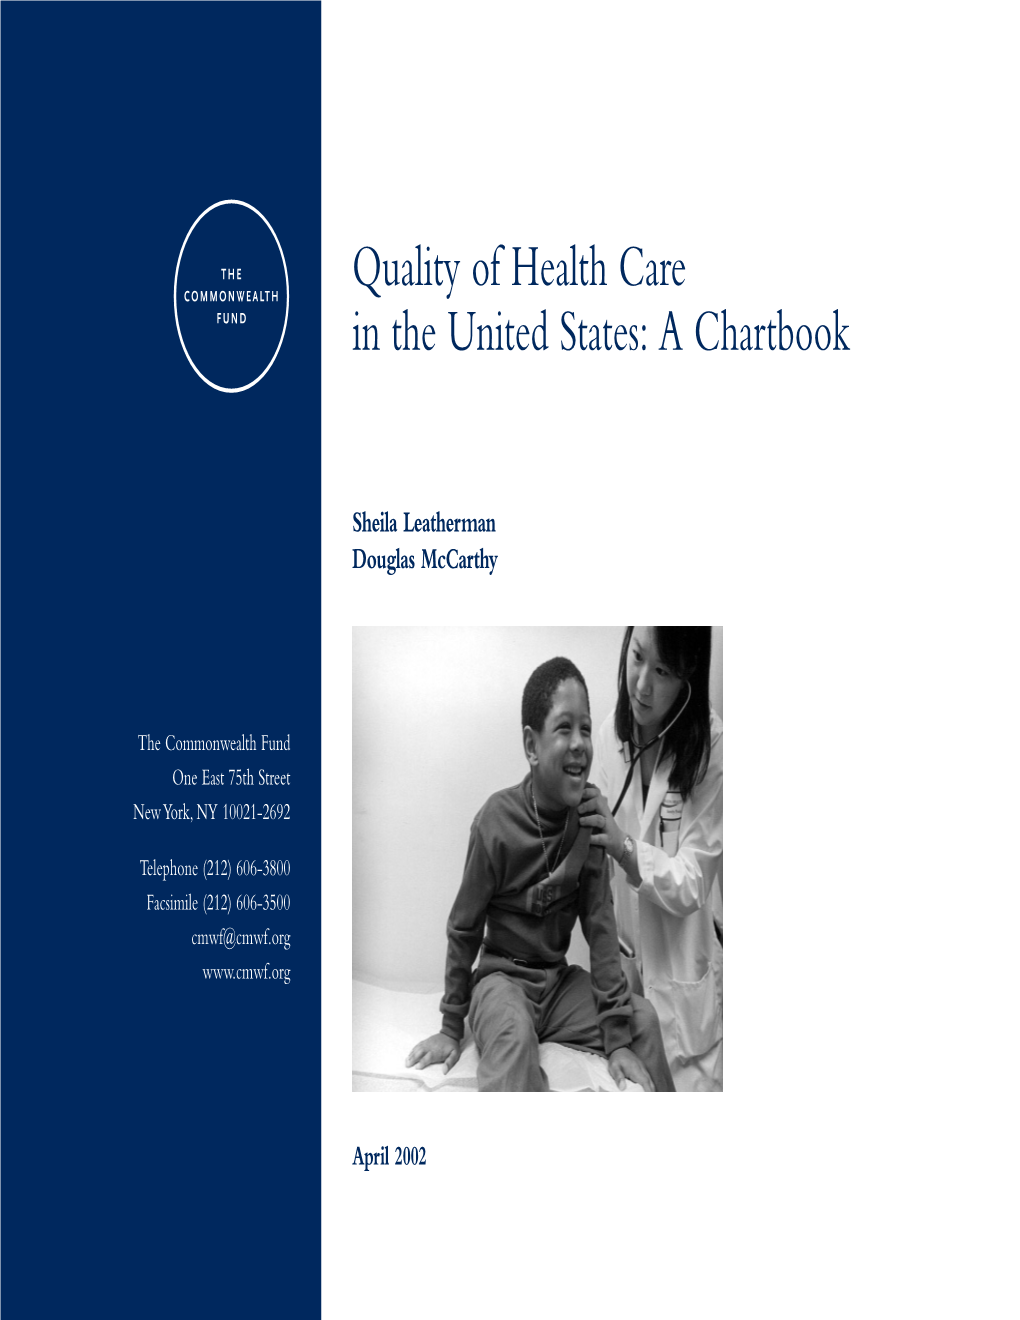 Quality of Health Care in the United States: a Chartbook